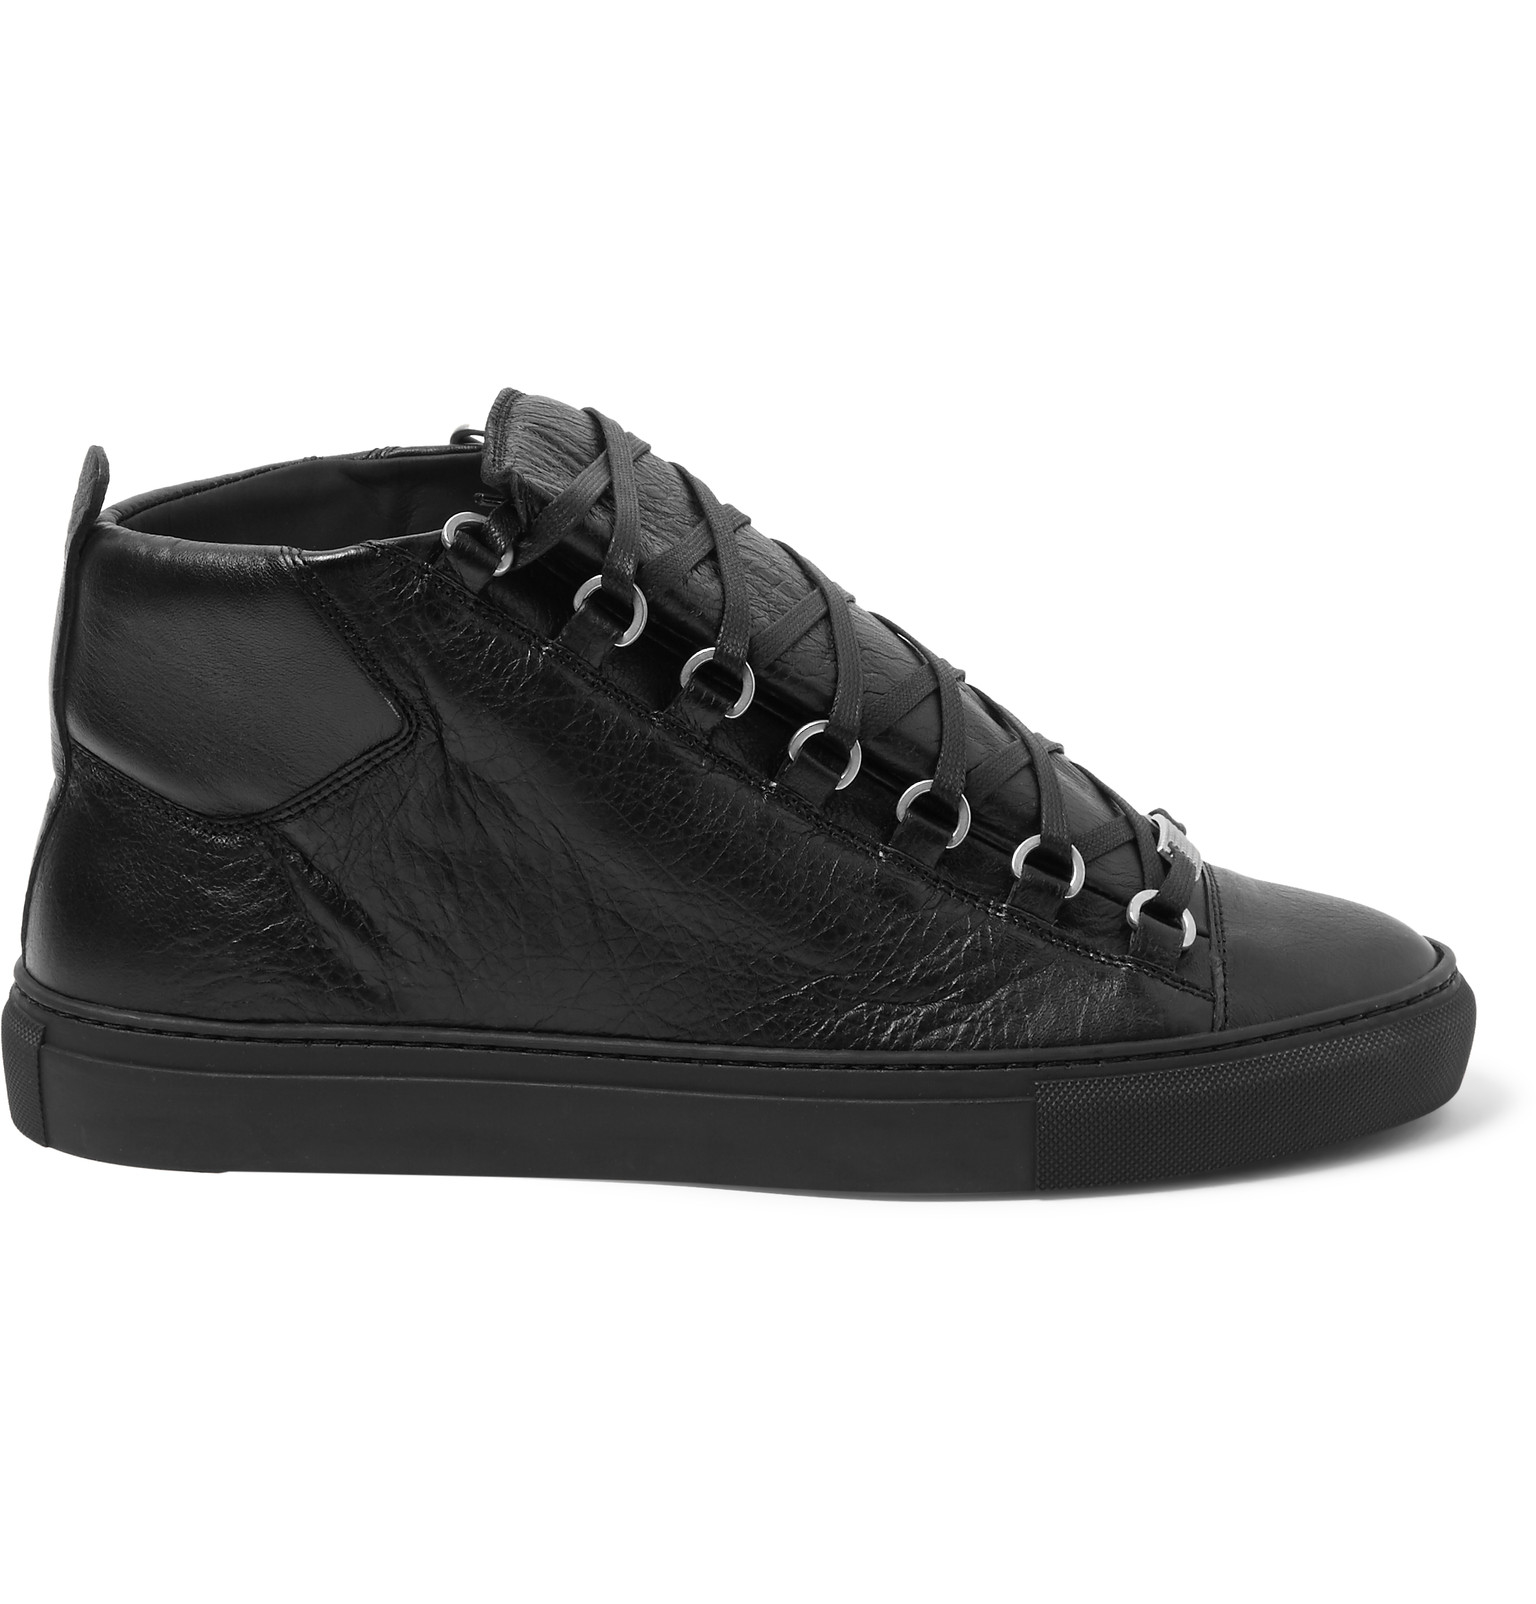 Balenciaga Arena Creased-leather Sneakers in Black for Men - Lyst